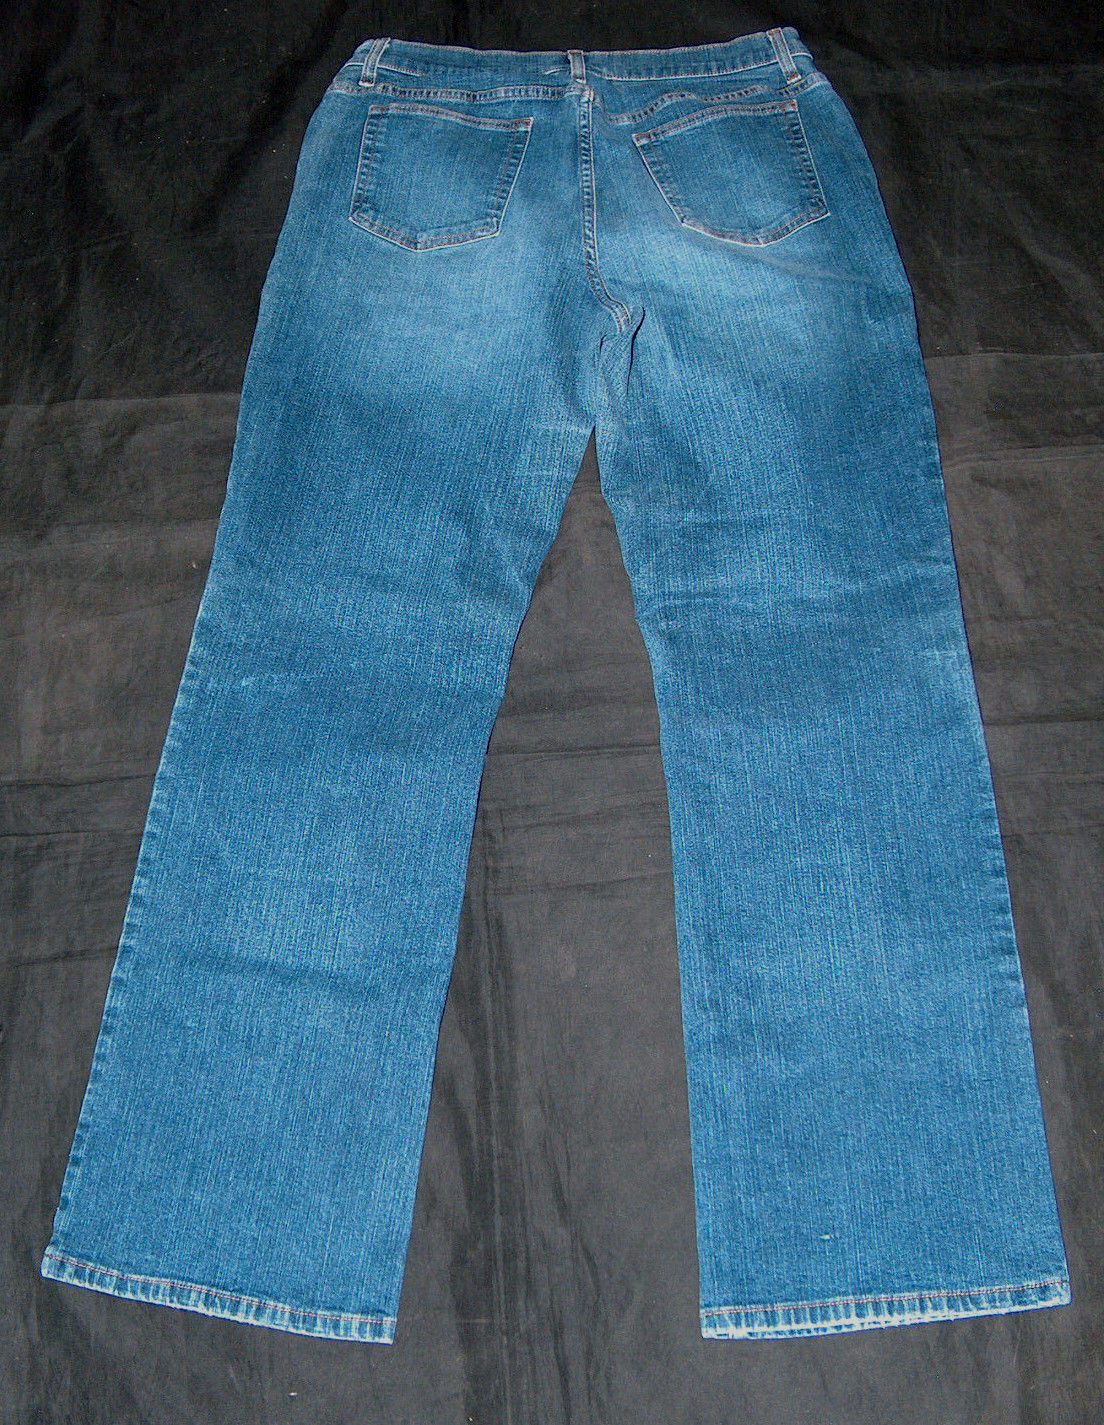 Sonoma Life + Style Stretch Boot Cut Jeans Sz 12 Average Missy Classsic ...